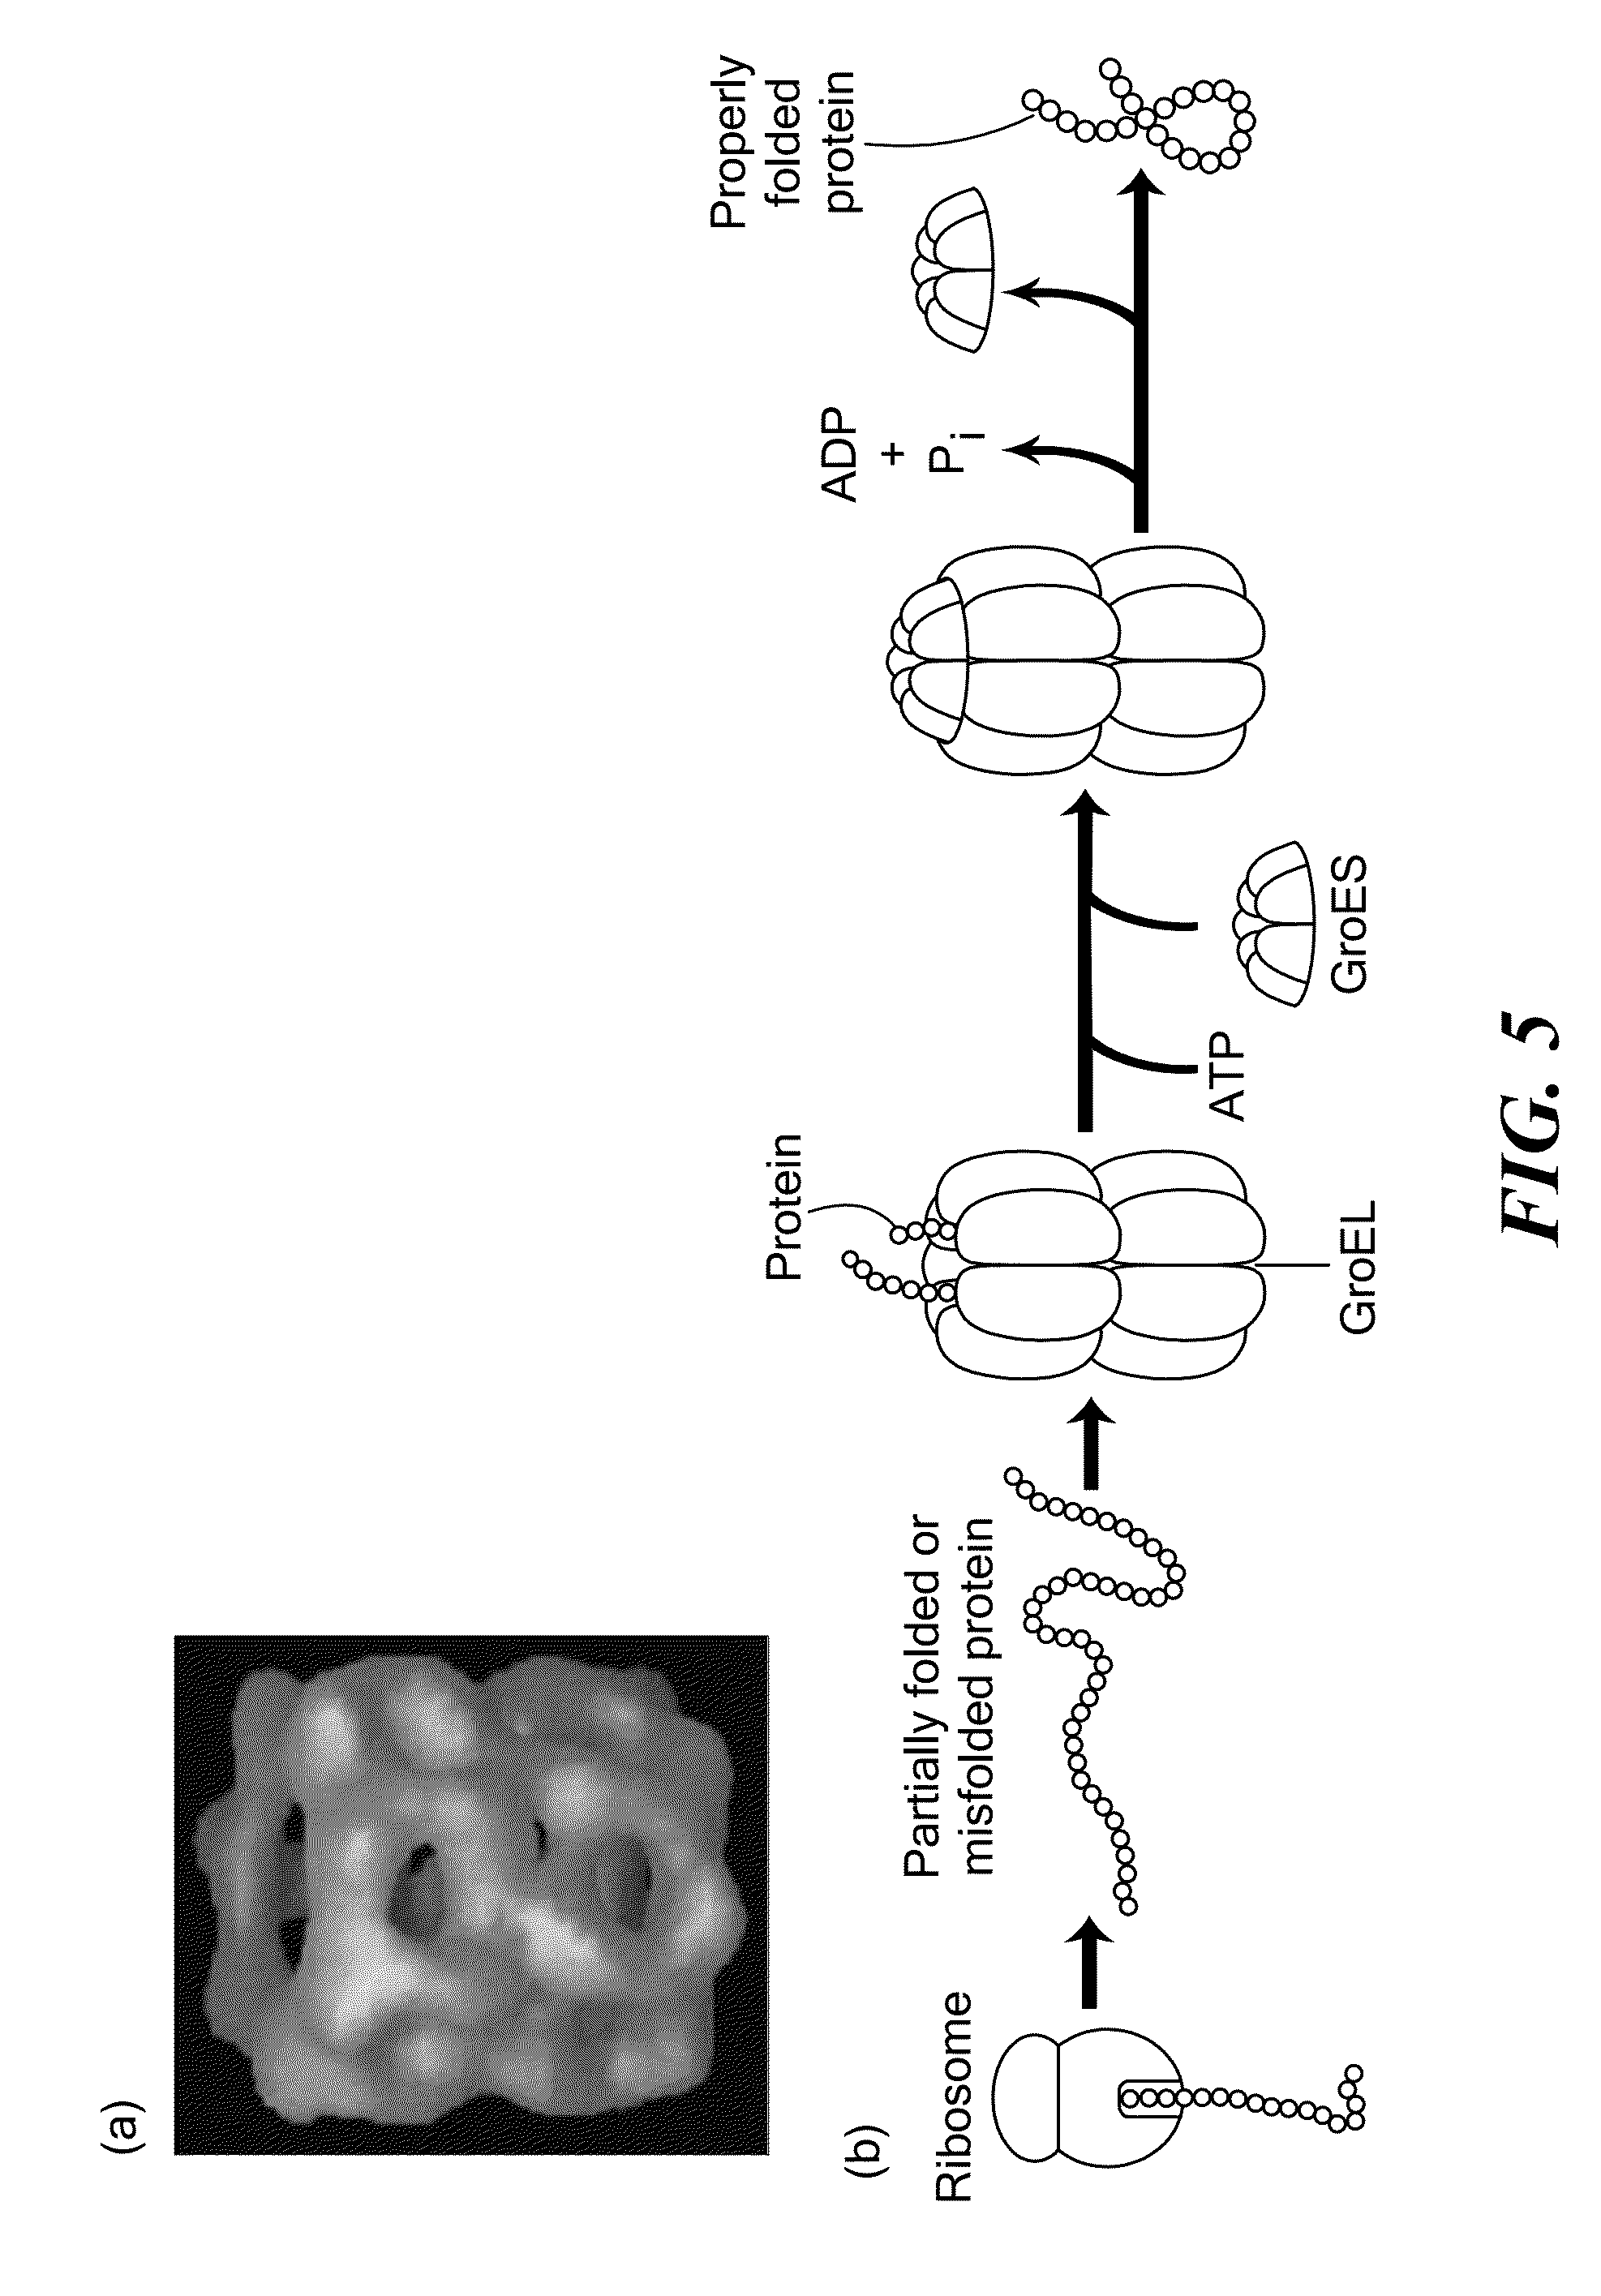 Method for the harvesting, processing, and storage of proteins from the mammalian feto-placental unit and use of such proteins in compositions and medical treatment